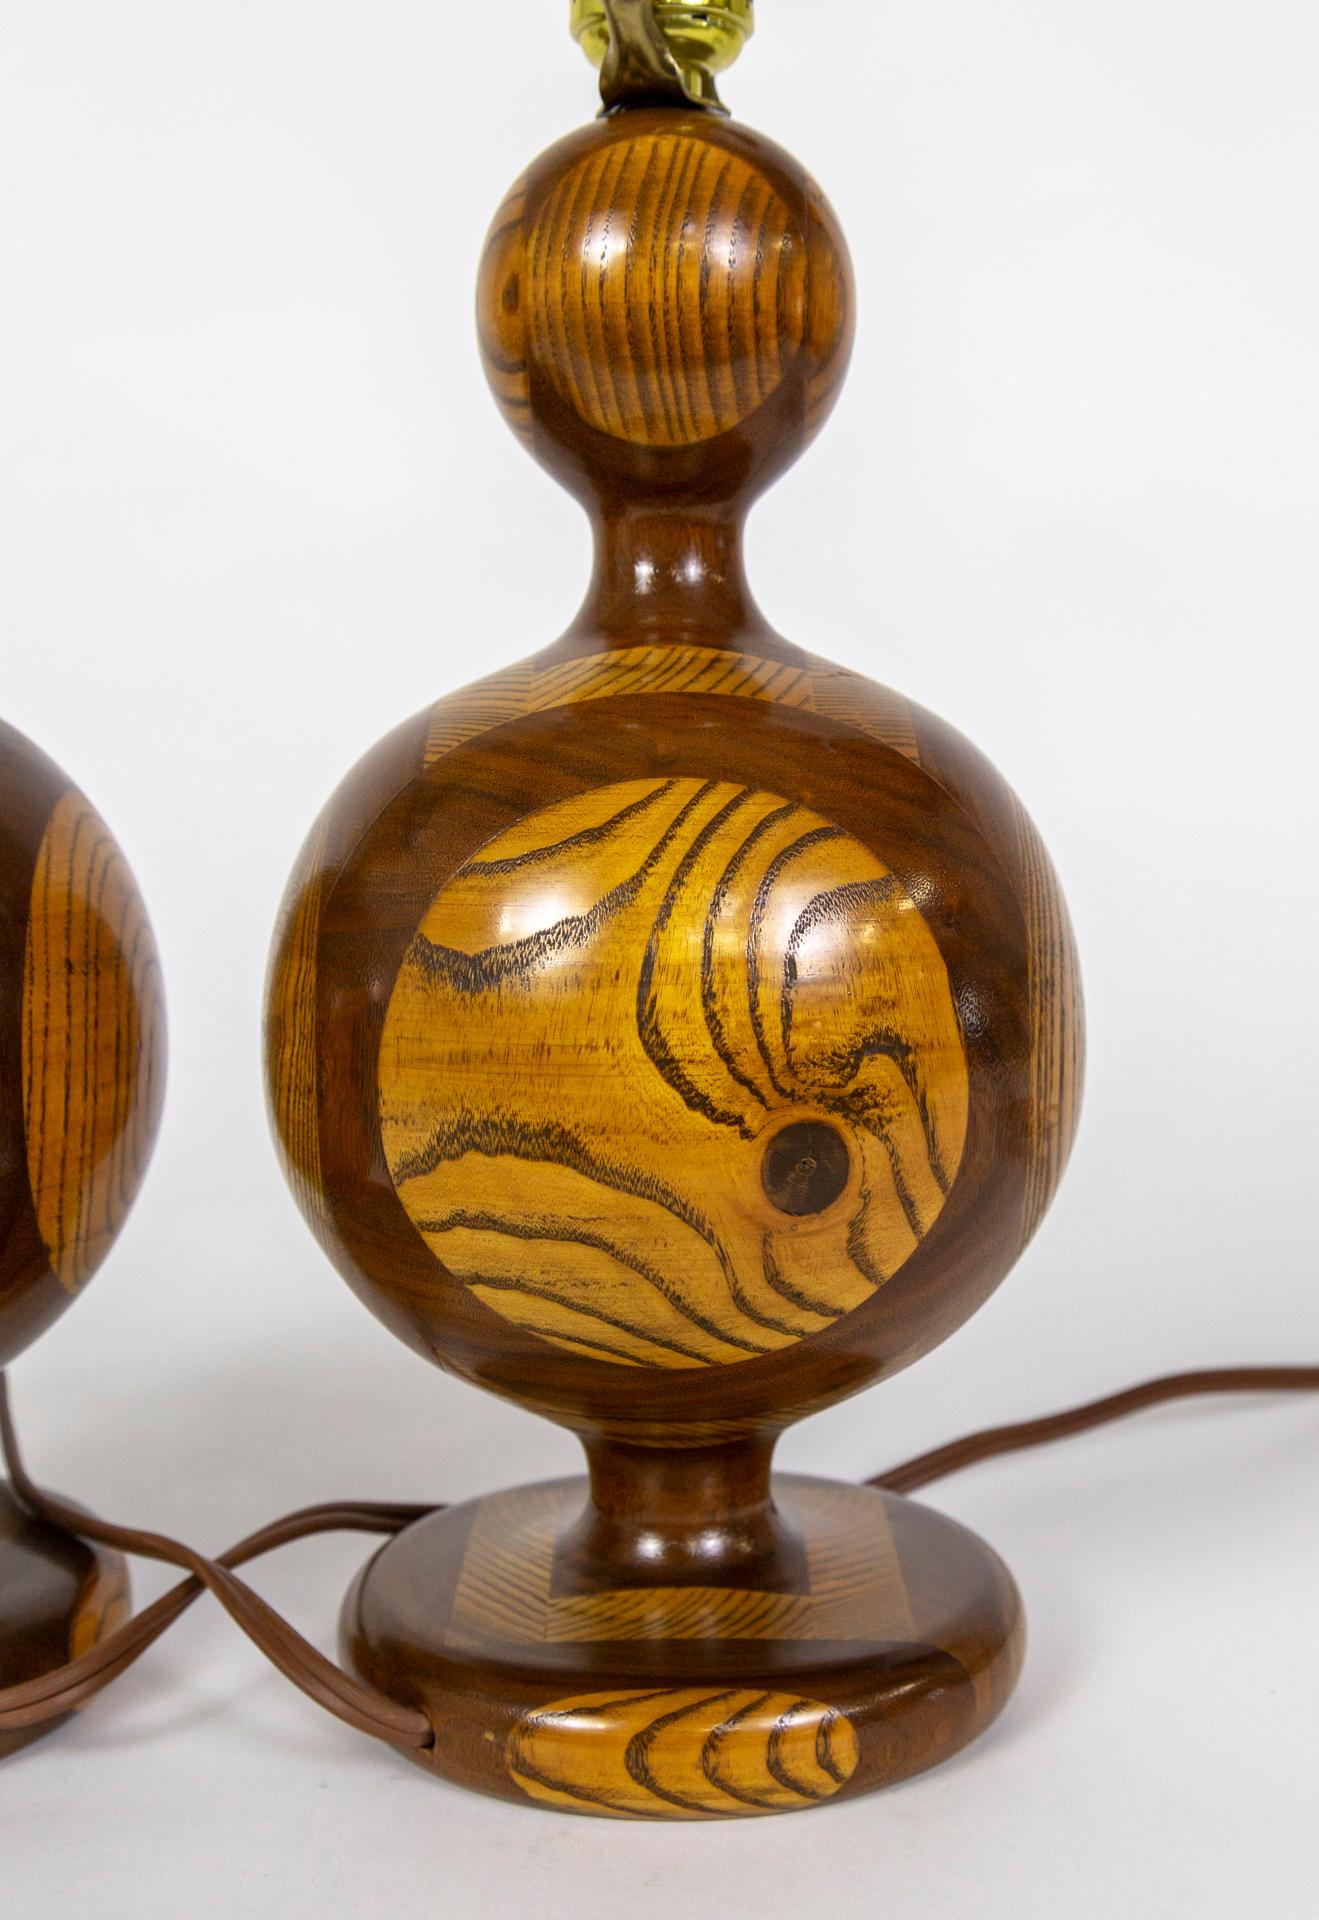 A pair of finely crafted, midcentury table lamps made of segmented wood- a composite of various kinds of wood combined in blocks to reveal a complex design after being turned on a lathe. The heavy, hardwood lamps have a wavy, bulbous, modern shape